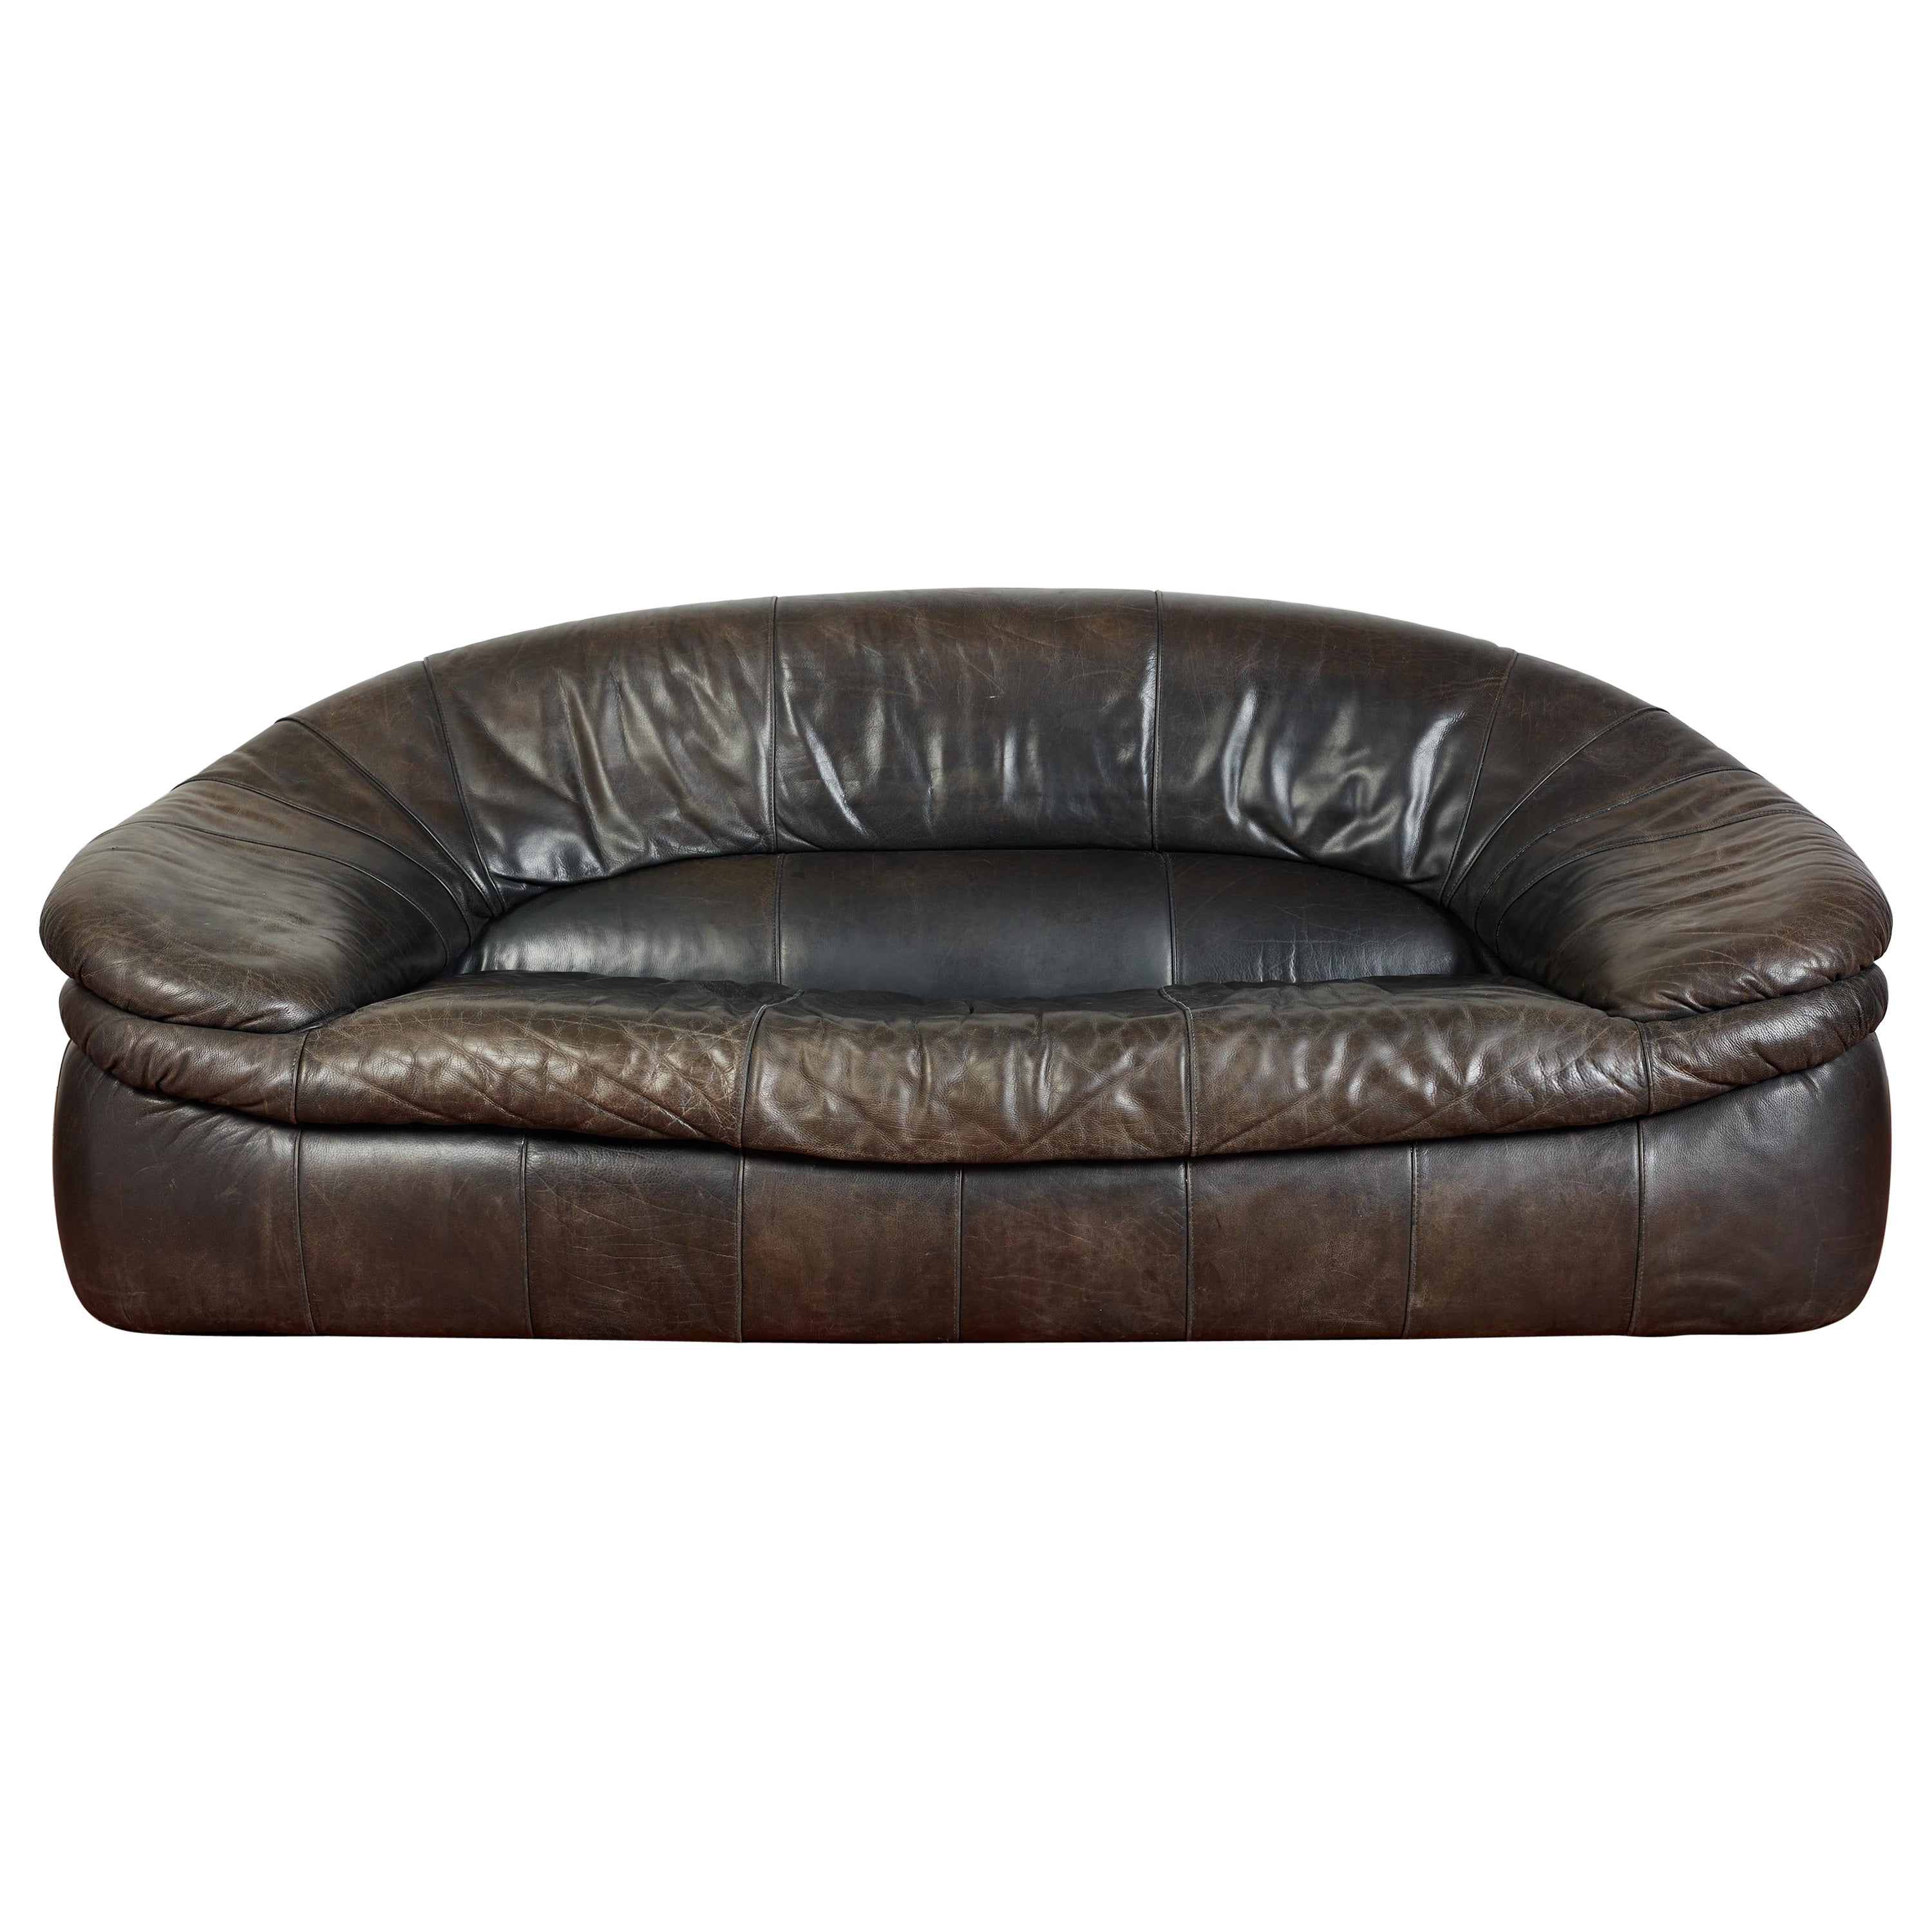 Is a leather sofa a good investment?